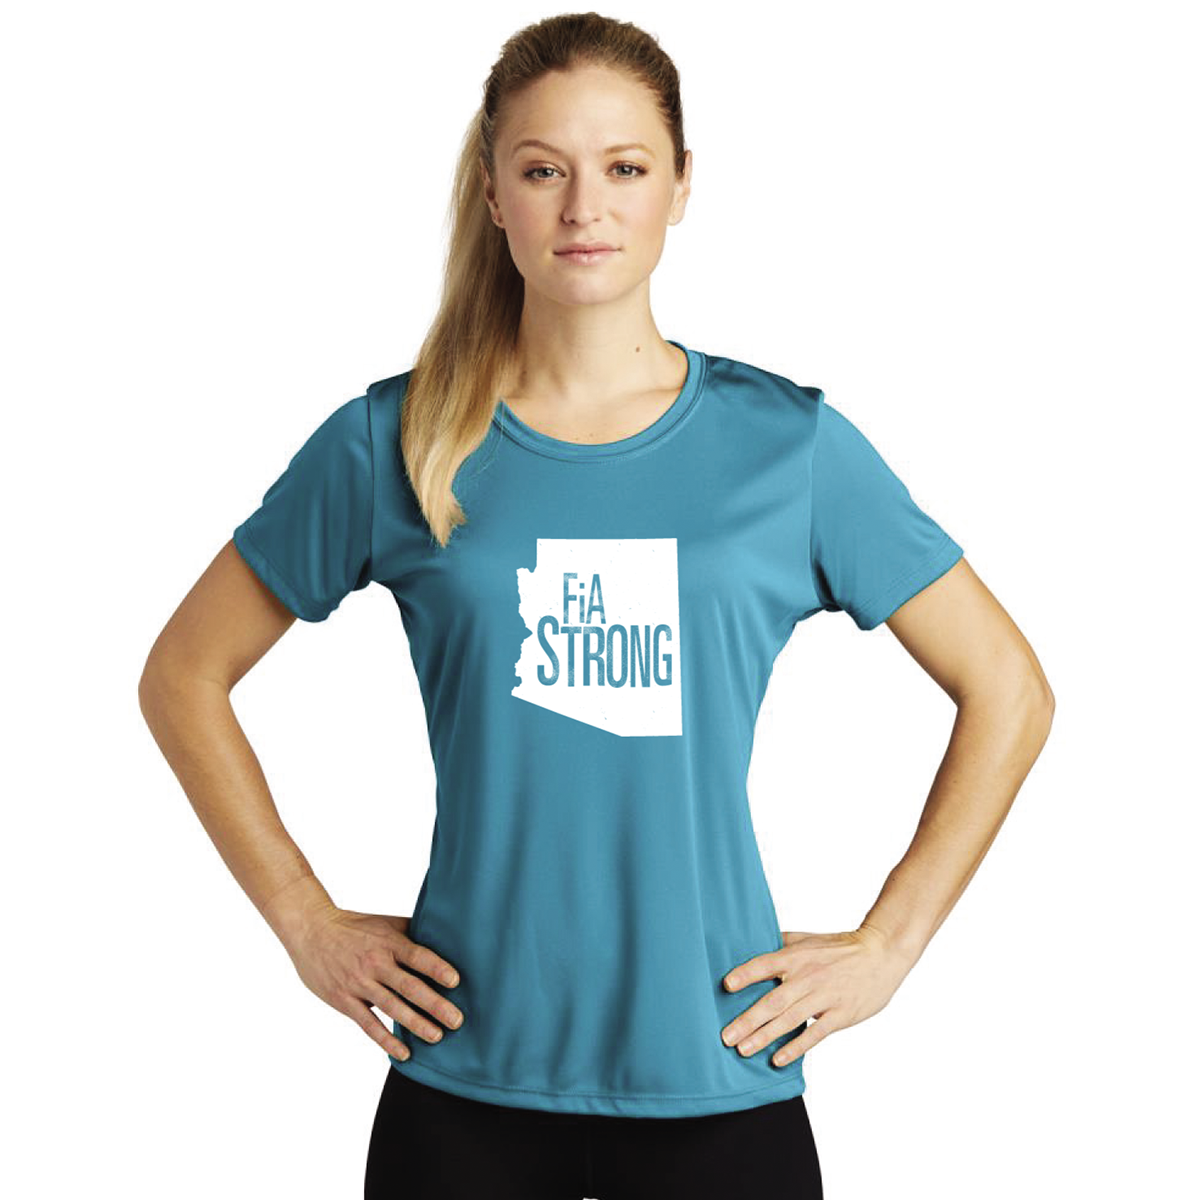 CLEARANCE ITEM - FiA Strong Arizona - Sport-Tek Ladies PosiCharge Competitor Tee